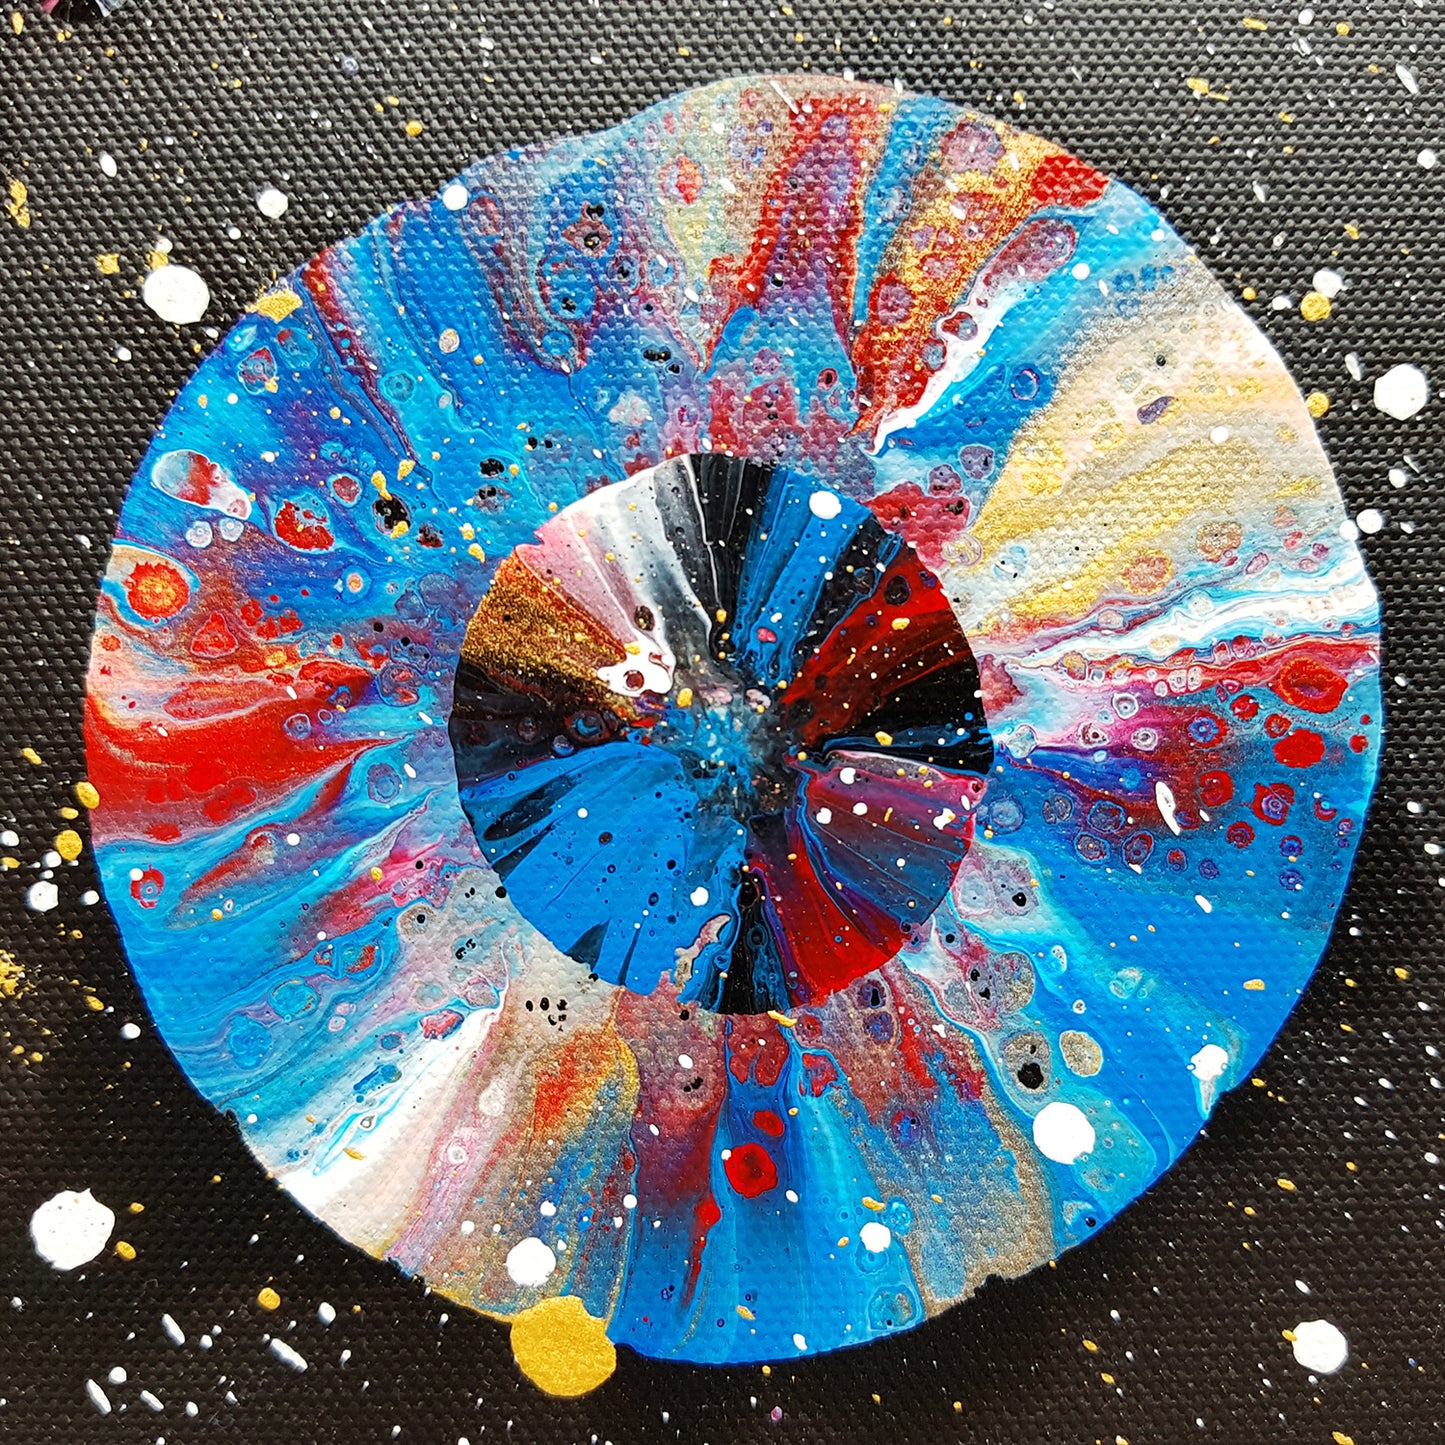 Psychedelic-Sky-by-Alexandra-Romano-Buy-Original-Abstract-Paintings-Contemporary-Art-Gallery-Galaxy-Artwork-Splatter-Paint